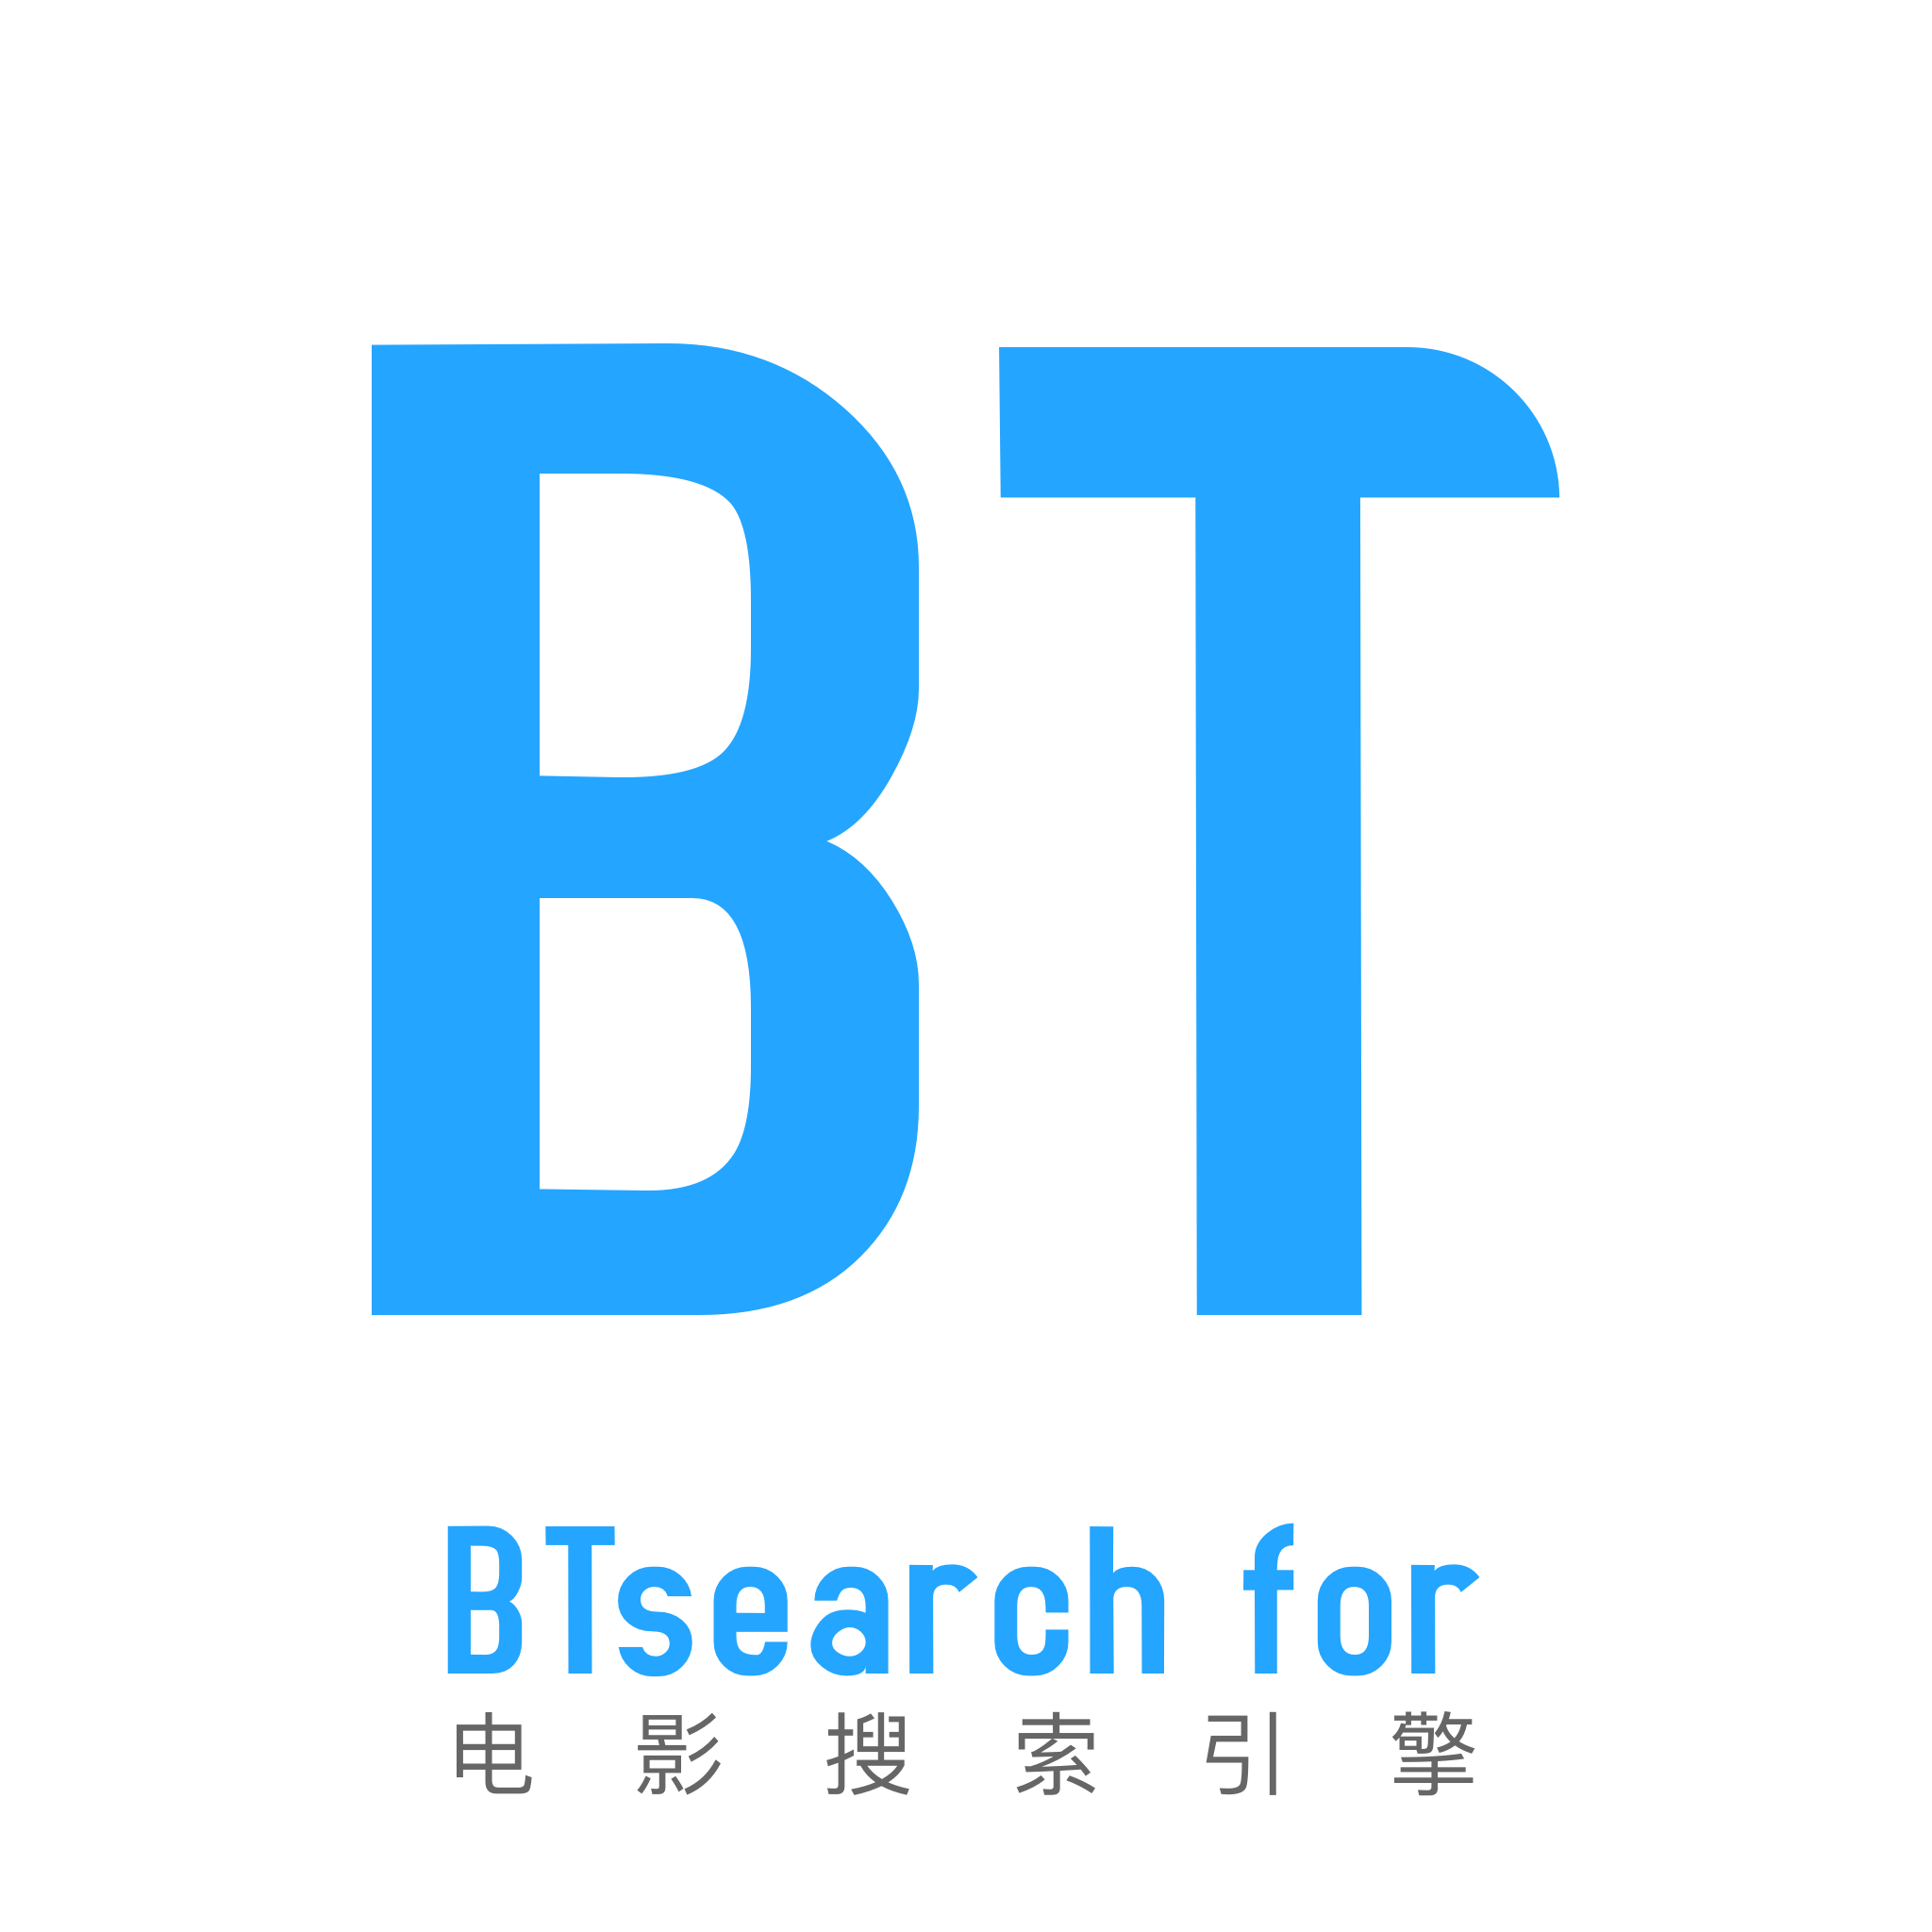 BTsearch for